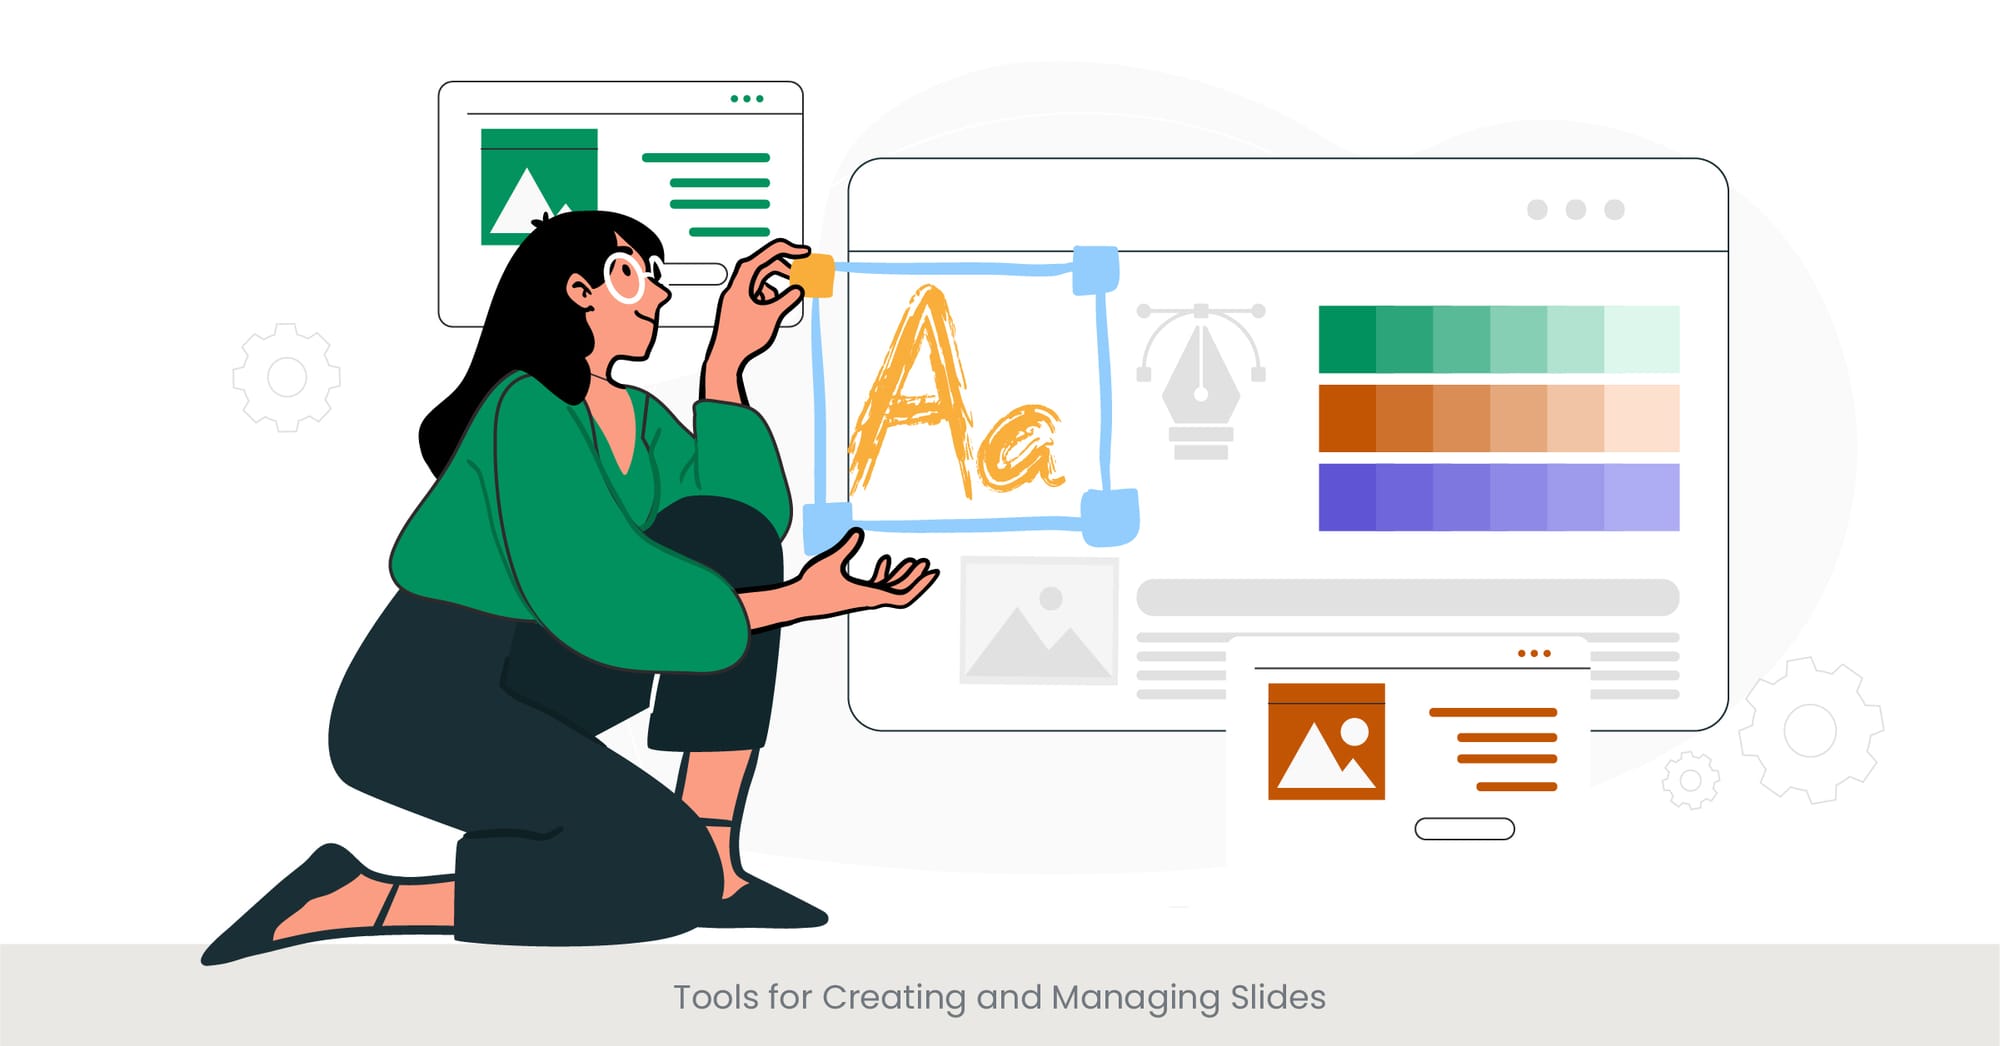 Tools for Creating and Managing Slides